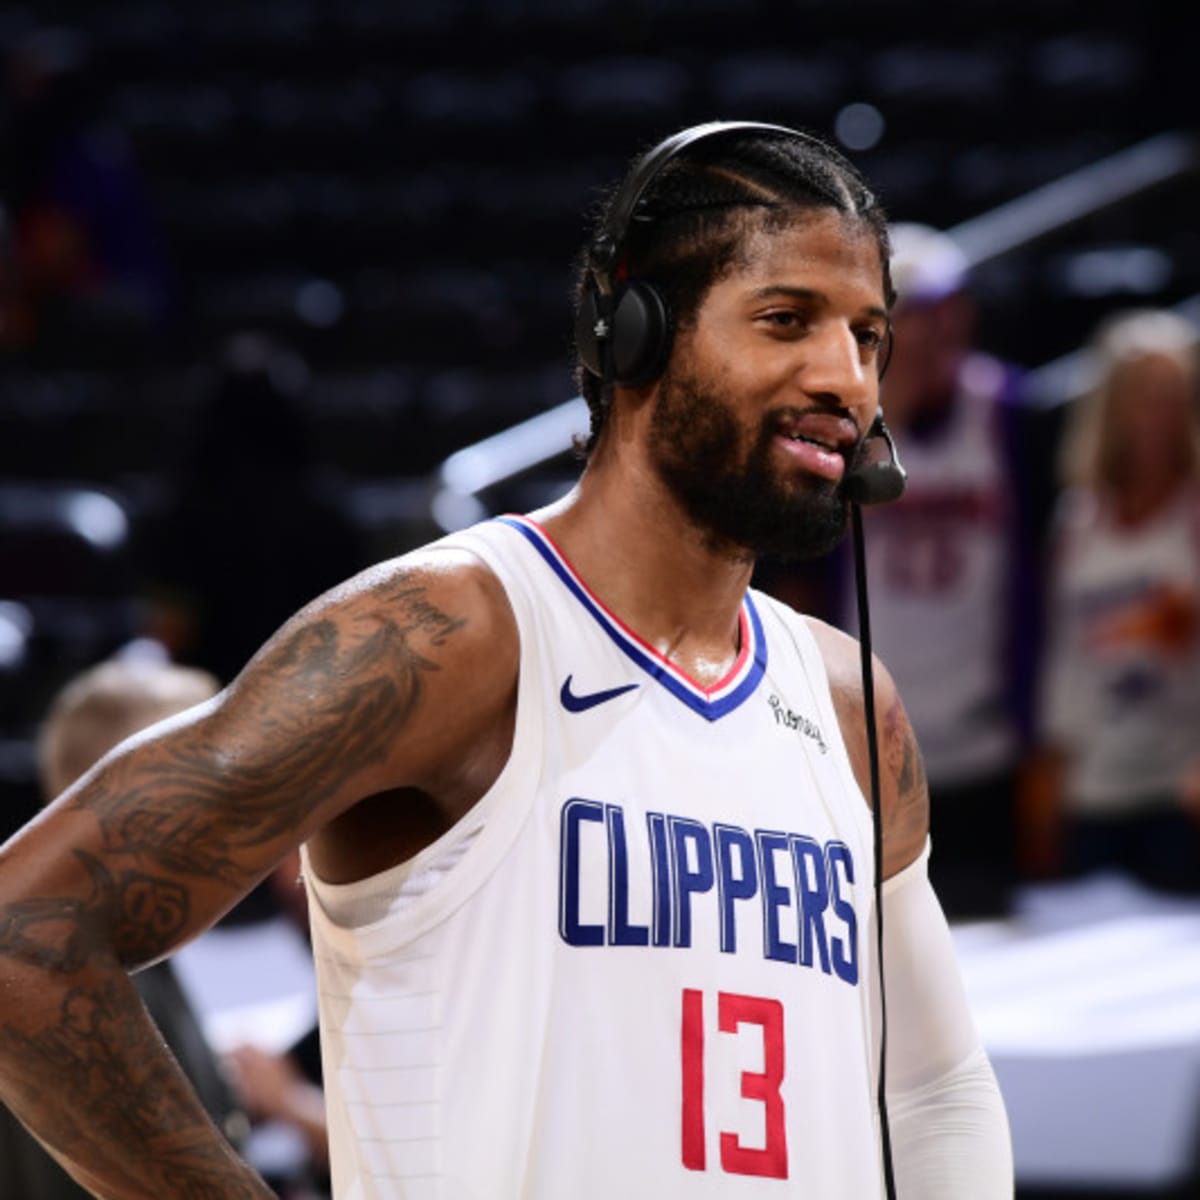 Clippers' Lue expects Leonard, George to be healthy for camp